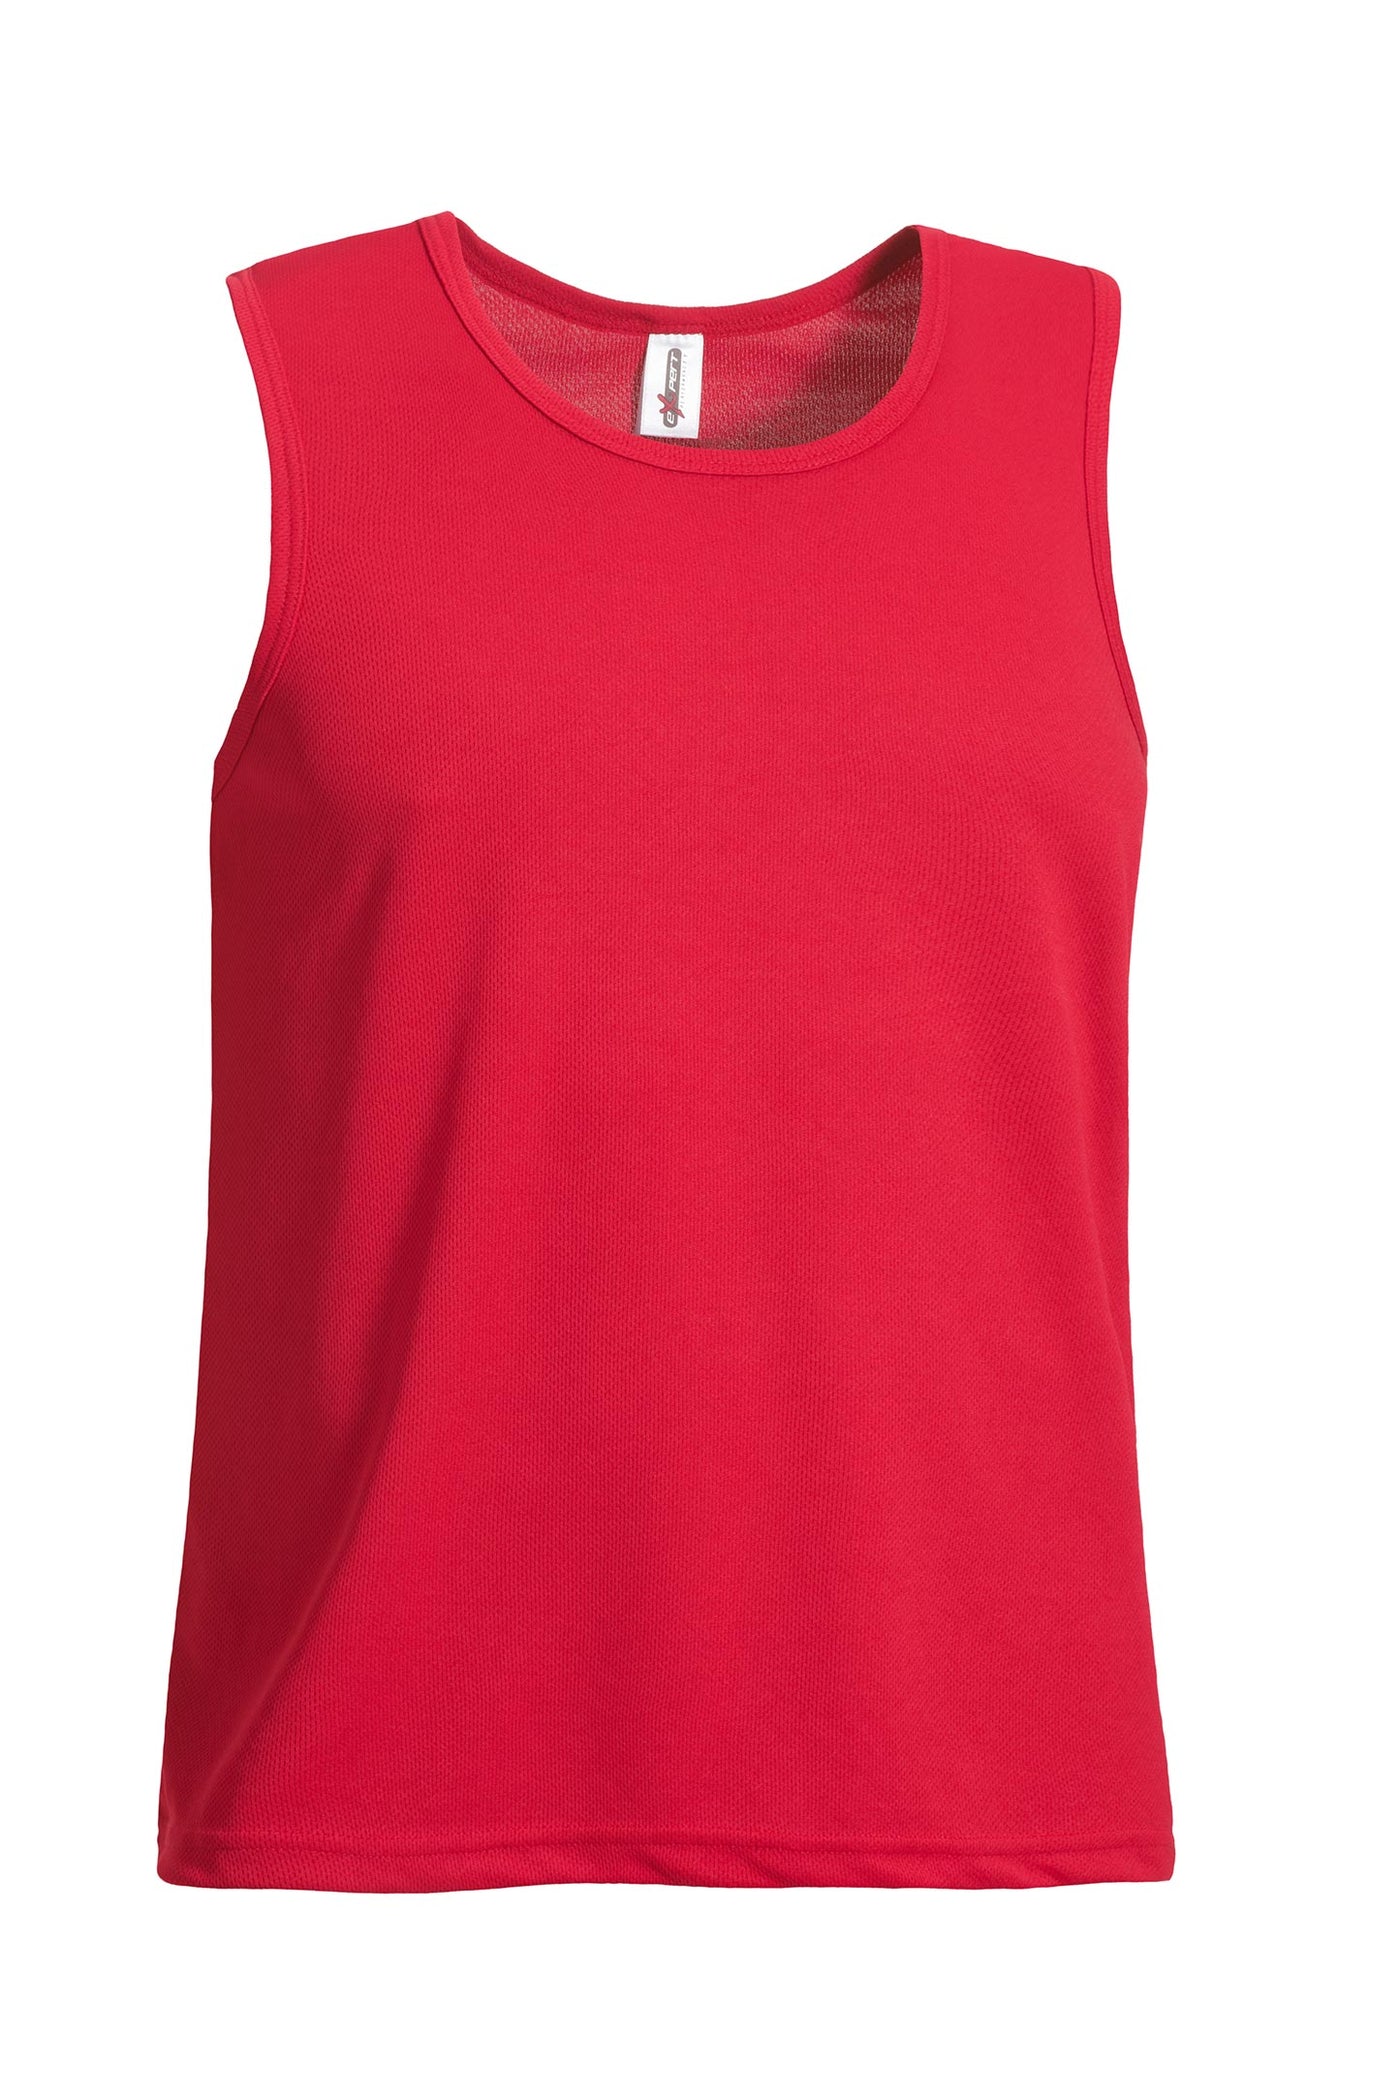 Expert Brand Retail Men's Oxymesh Tank Top Made in USA red#color_true-red